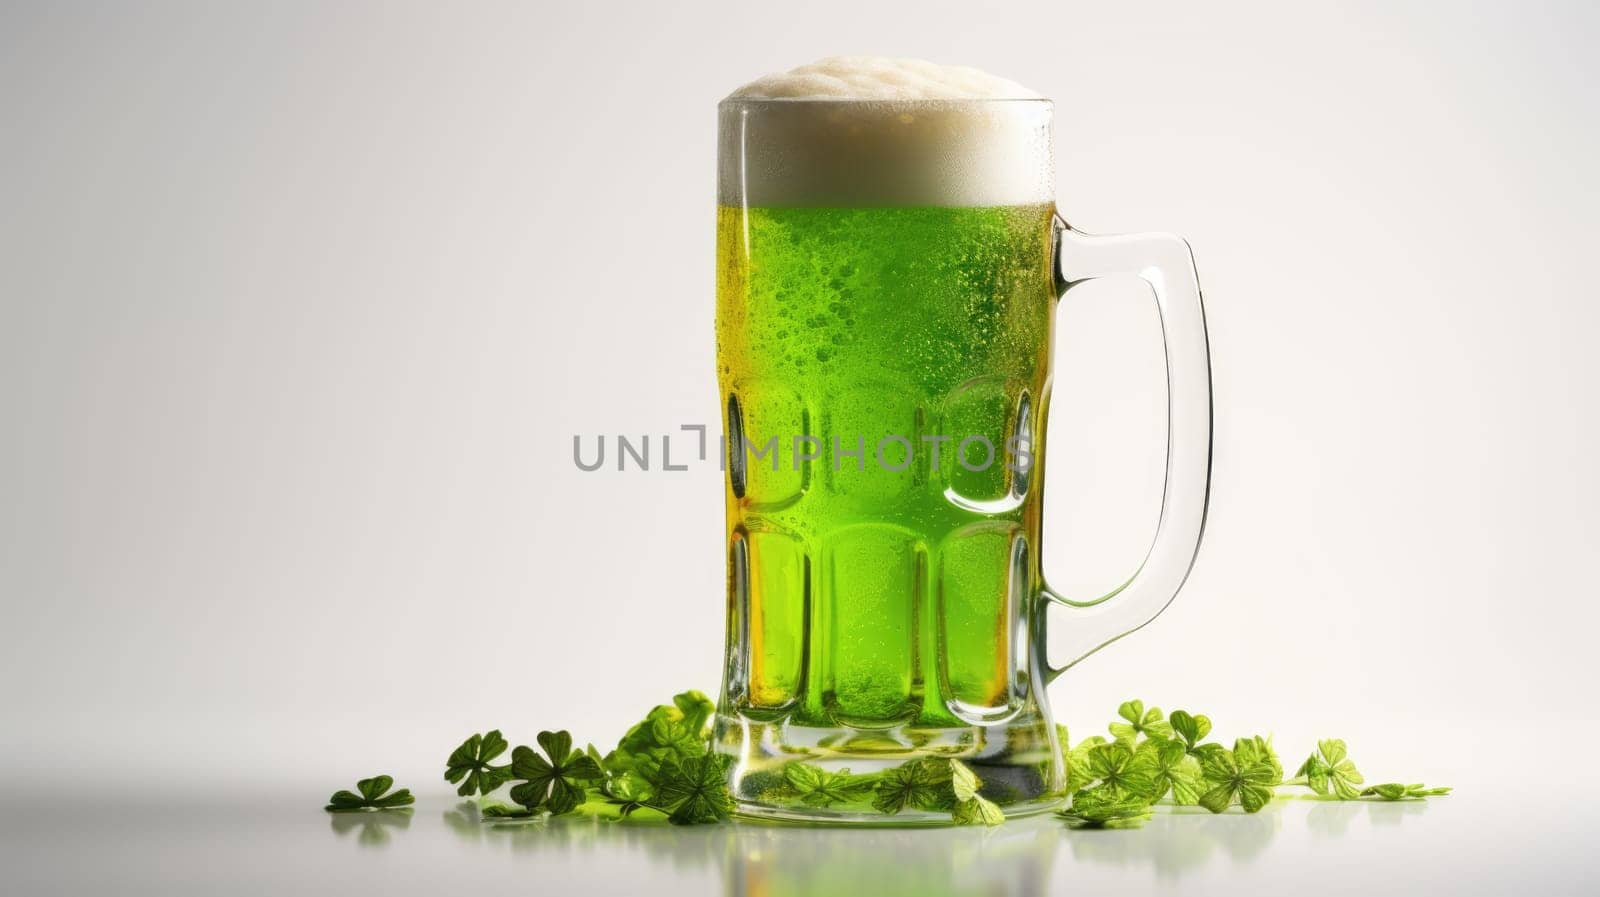 Cold green Beer with foam in a mug with Four-Leaf Clovers on light background, St. Patricks Day Celebration by JuliaDorian